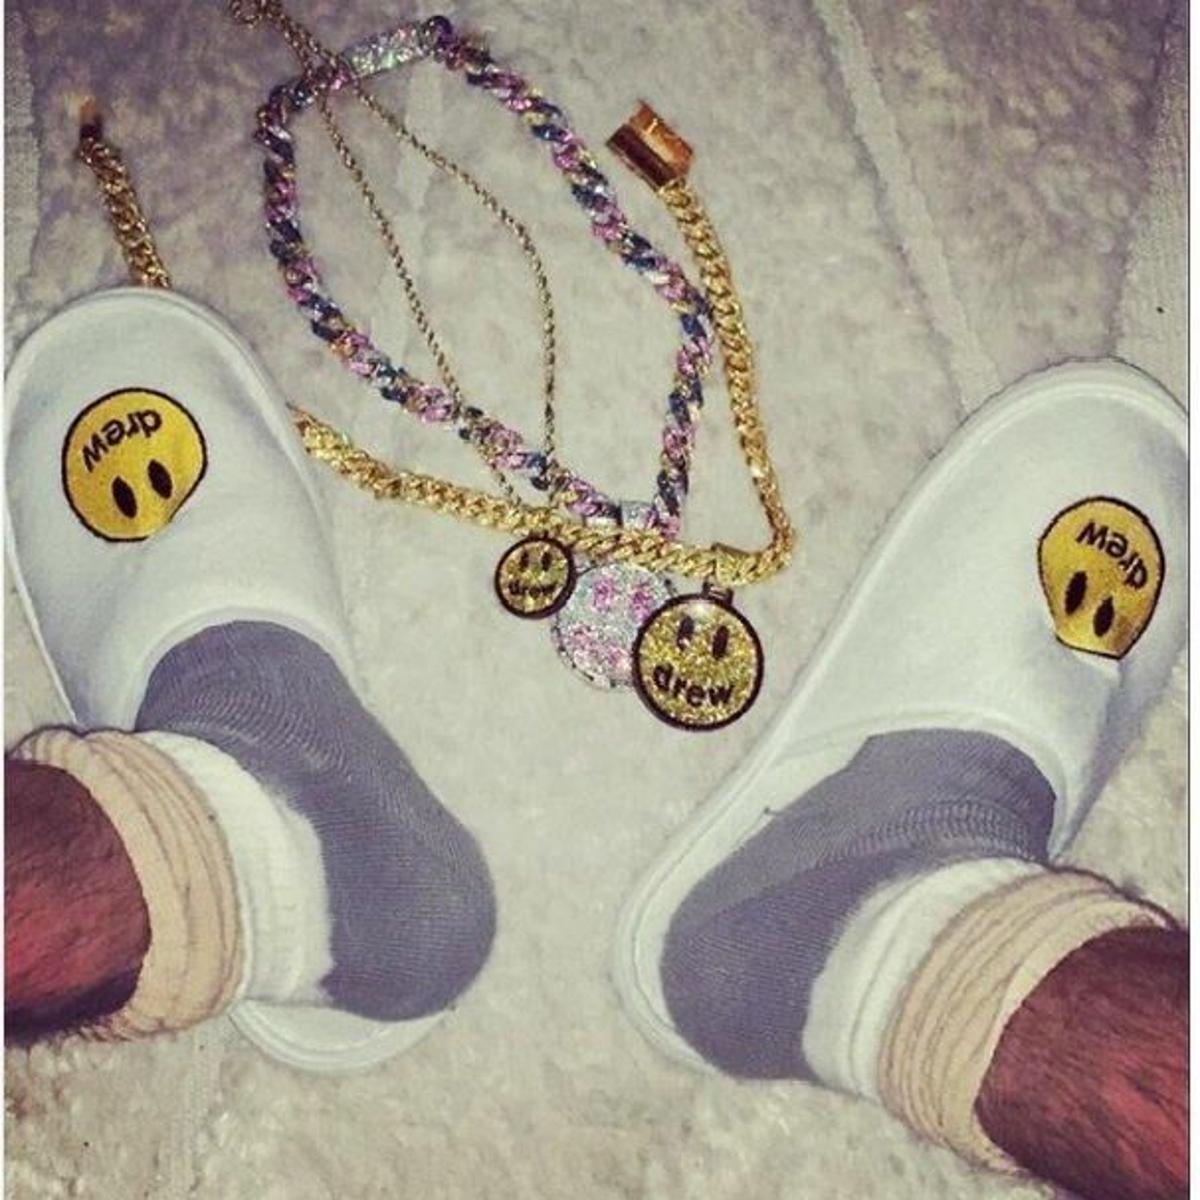 Justin Bieber has launched his own line of 'hotel slippers' and